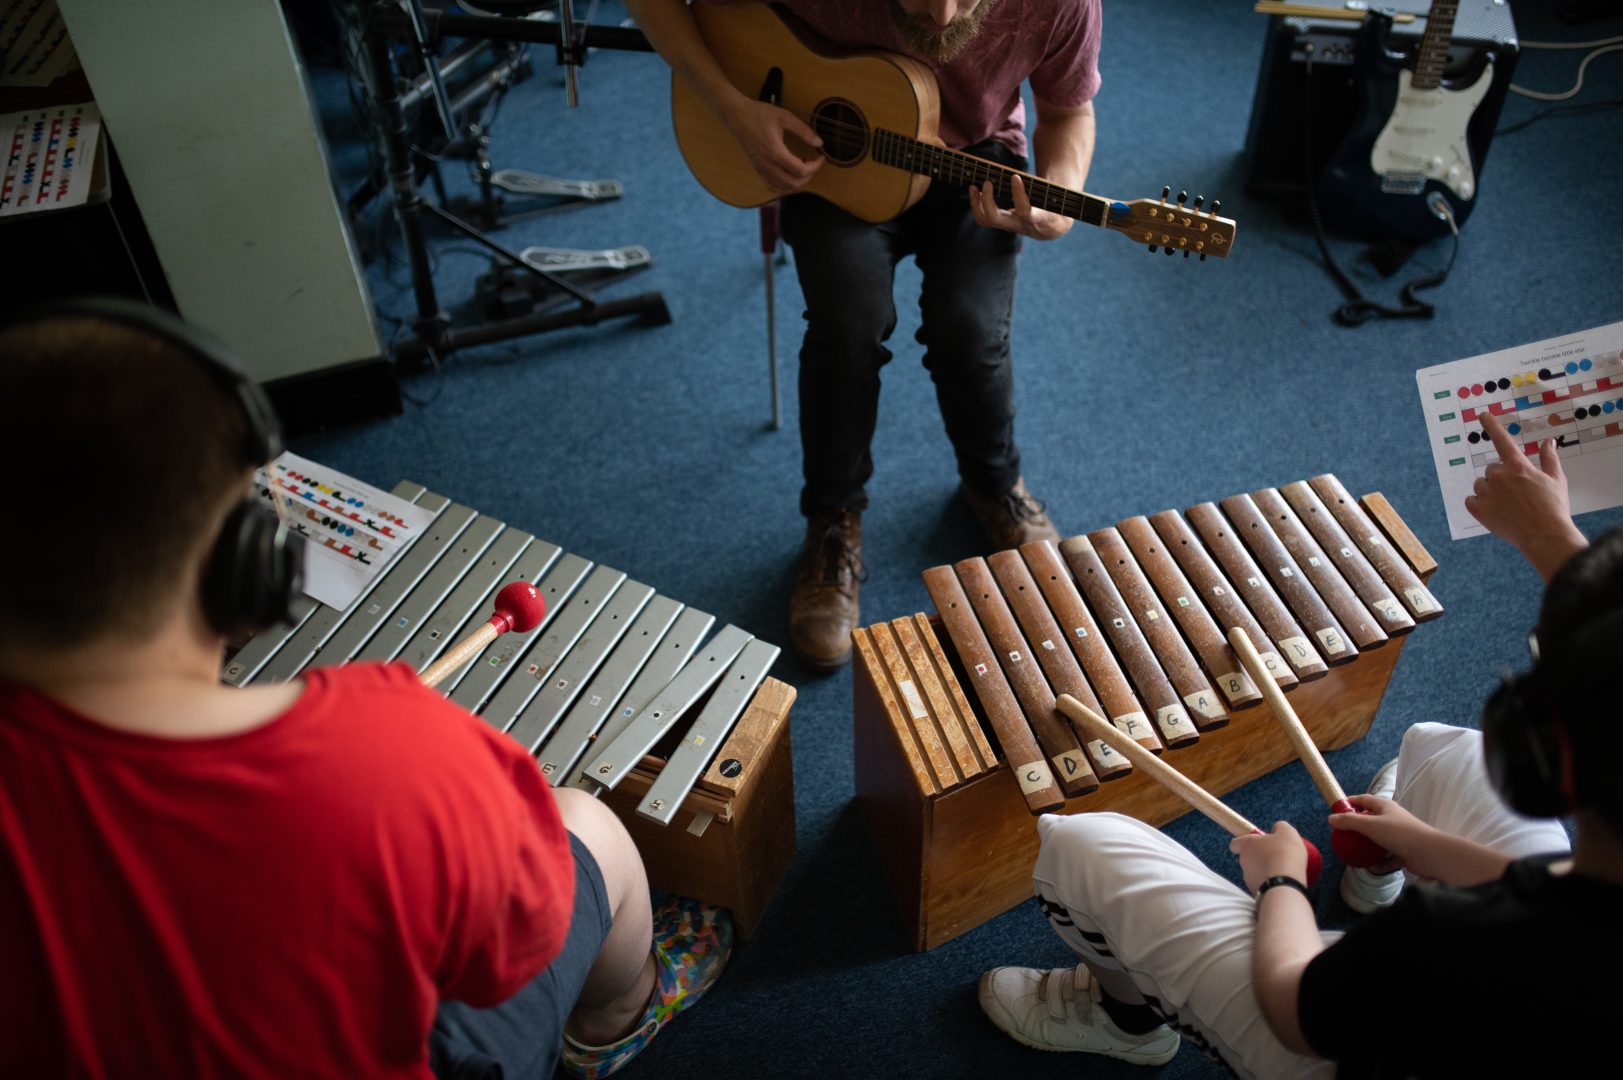 A birds-eye view of a glockenspiel played with red beaters, a xylophone played with wooden beaters, and a guitar being played.